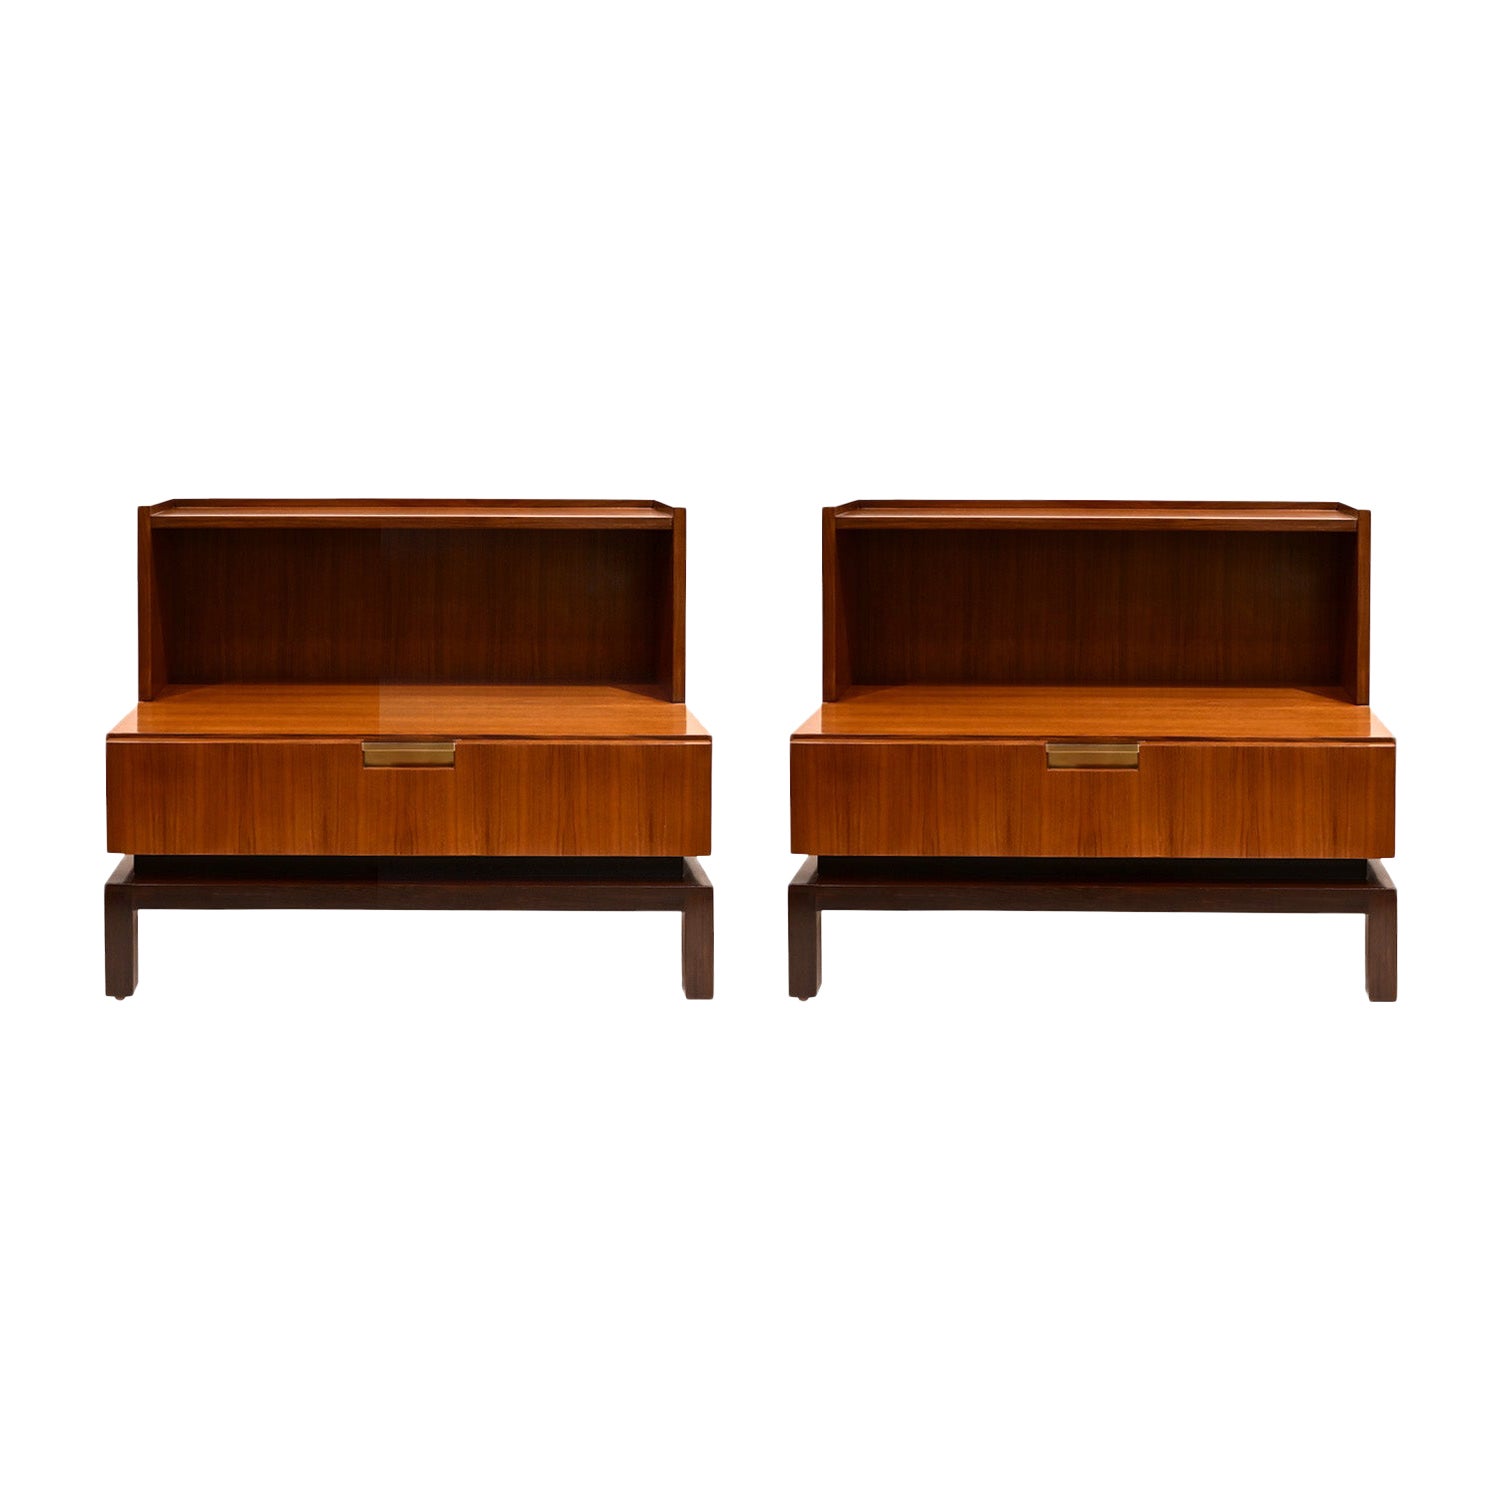 De Coene Freres Pair of Beautifully Tailored Bedside Tables 1960s For Sale